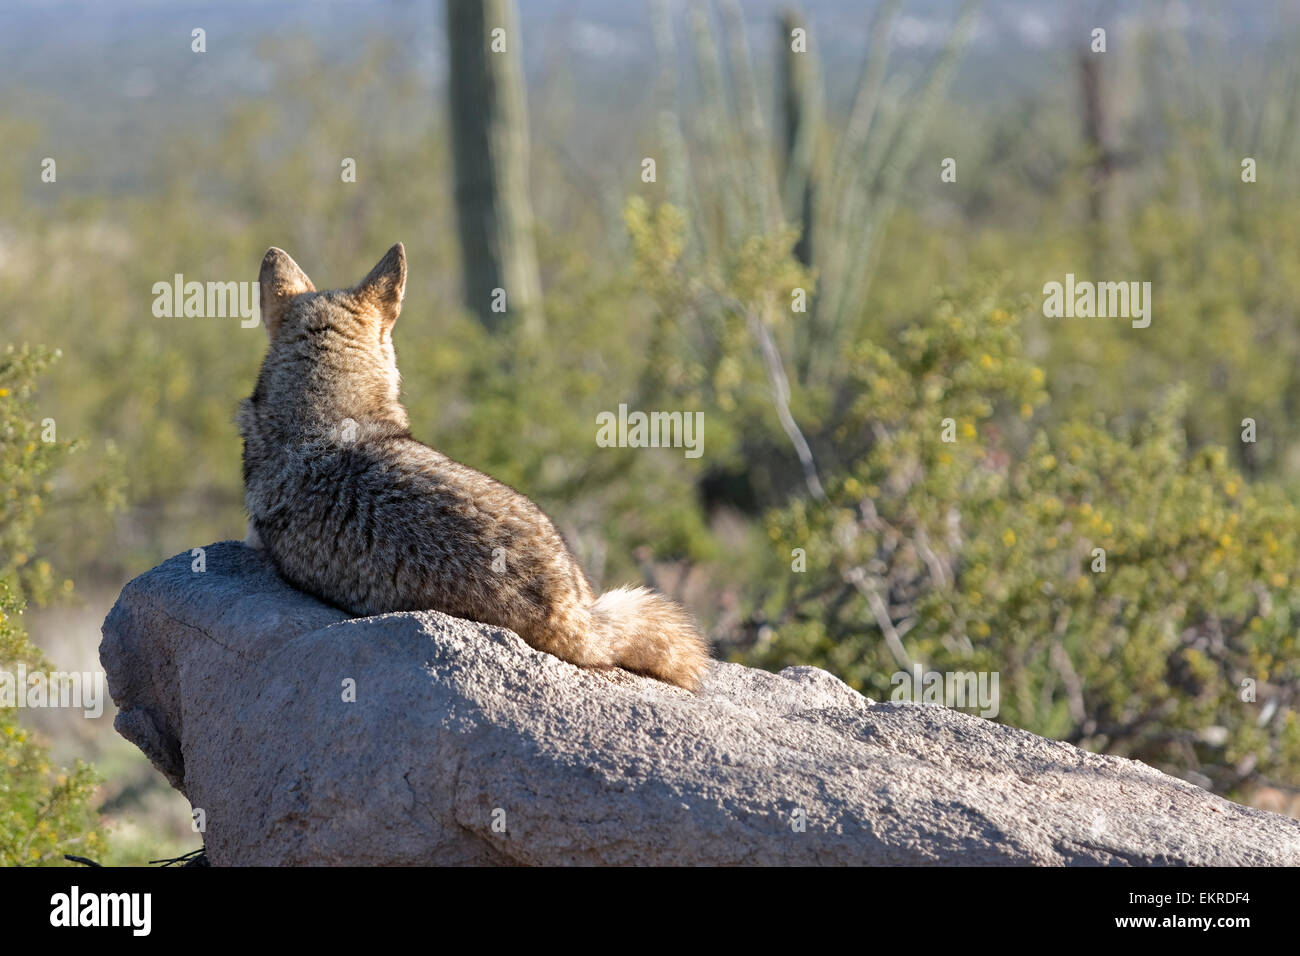 A Coyote pup is seen in Arizona Stock Photo - Alamy